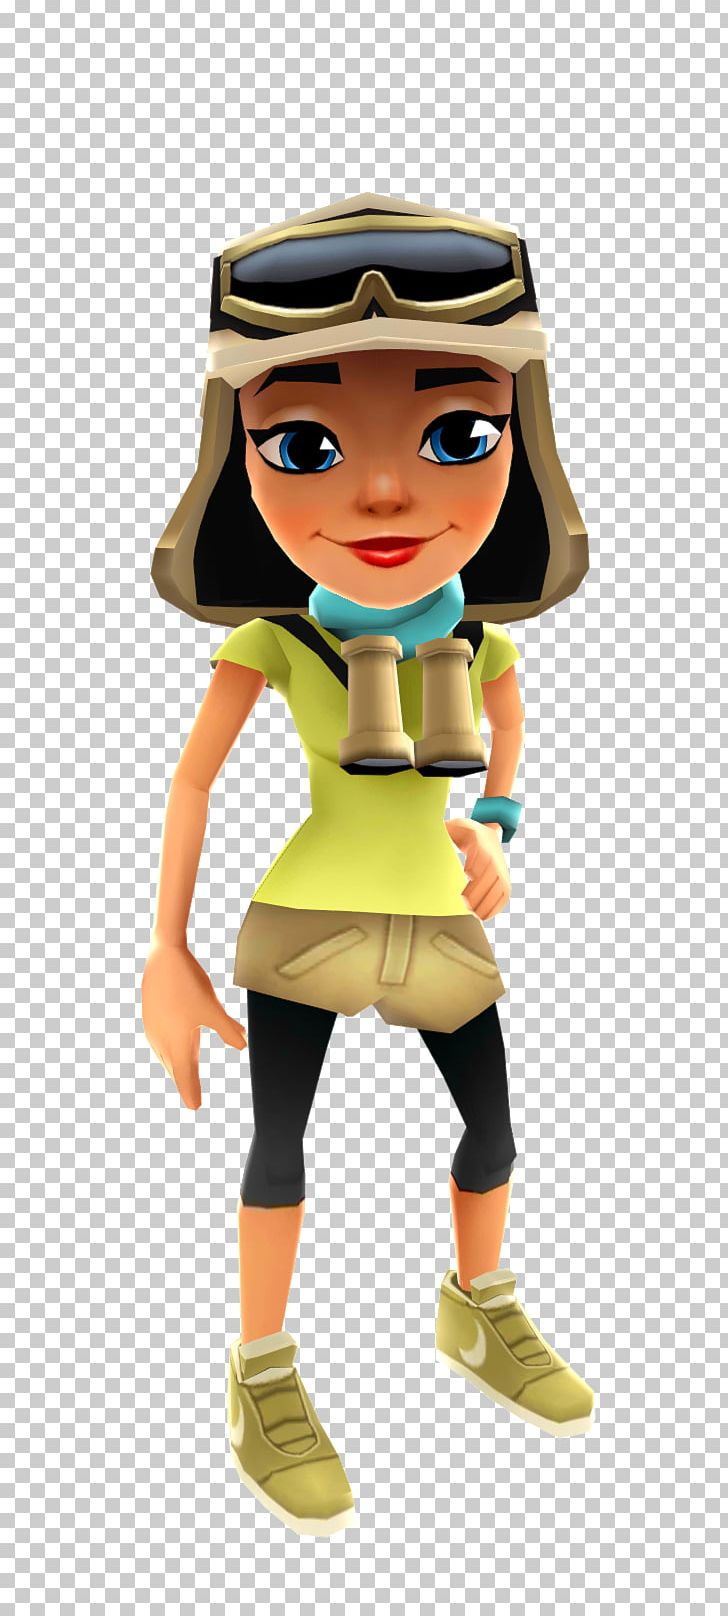 Subway Surfers Android Game Character PNG, Clipart, Action Figure, Android, Blond, Cairo, Character Free PNG Download